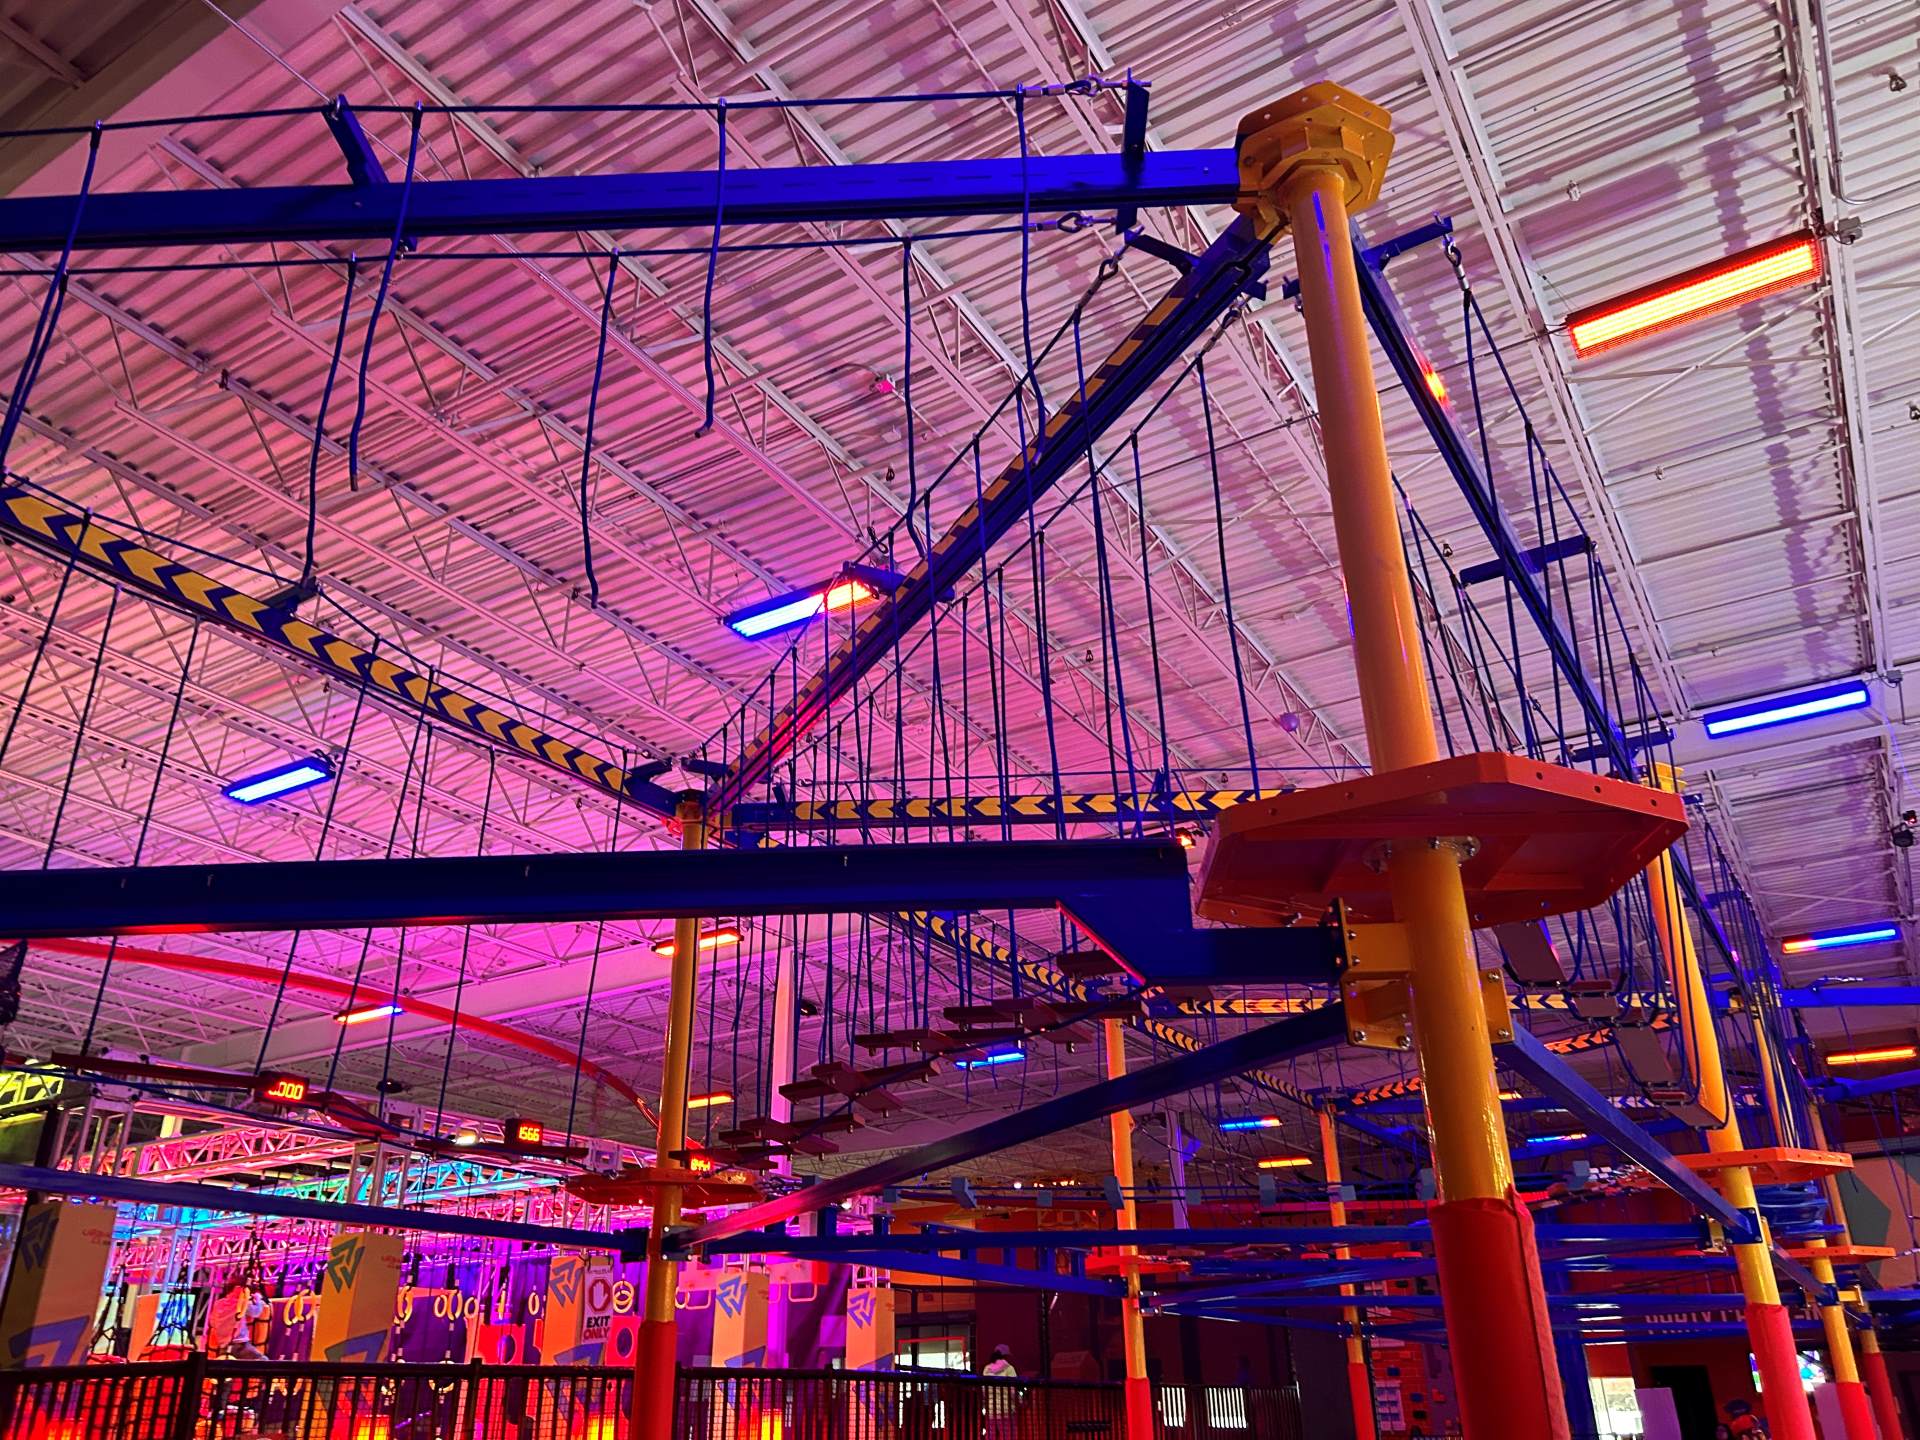 the climbing zone at Plymouth urban air is fun during your twin cities spring break